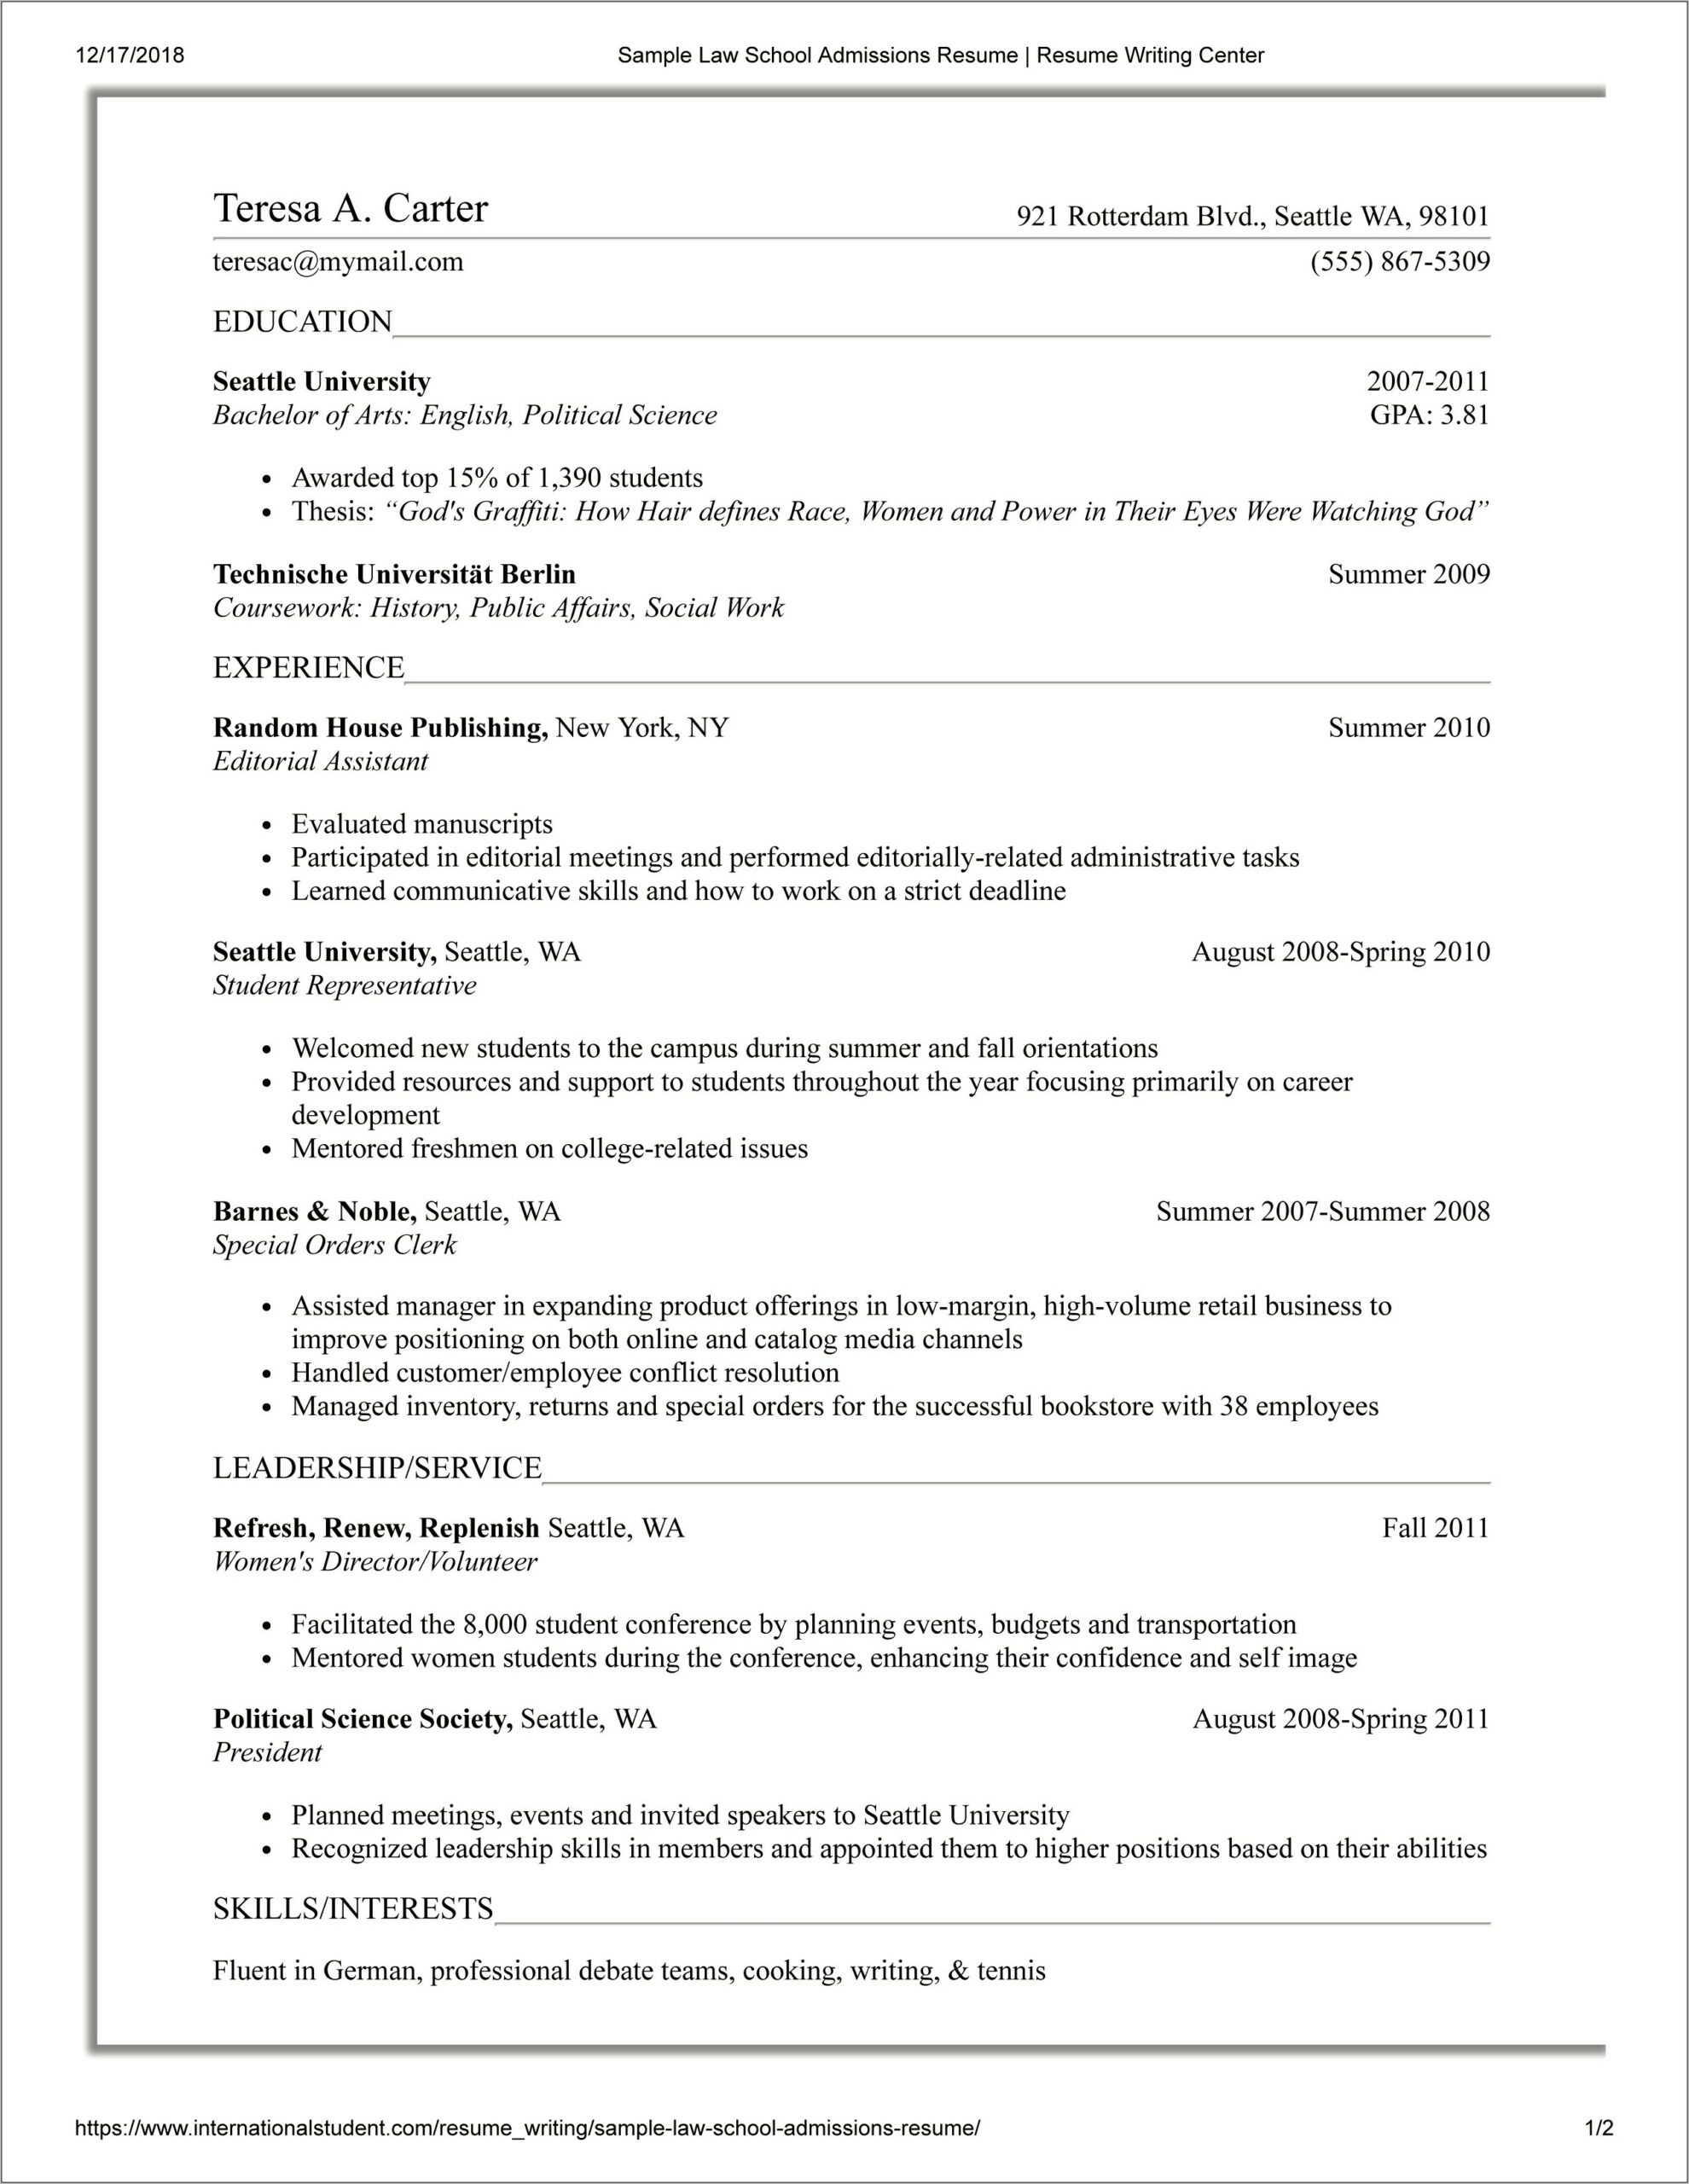 Personal Statement For High School Resume